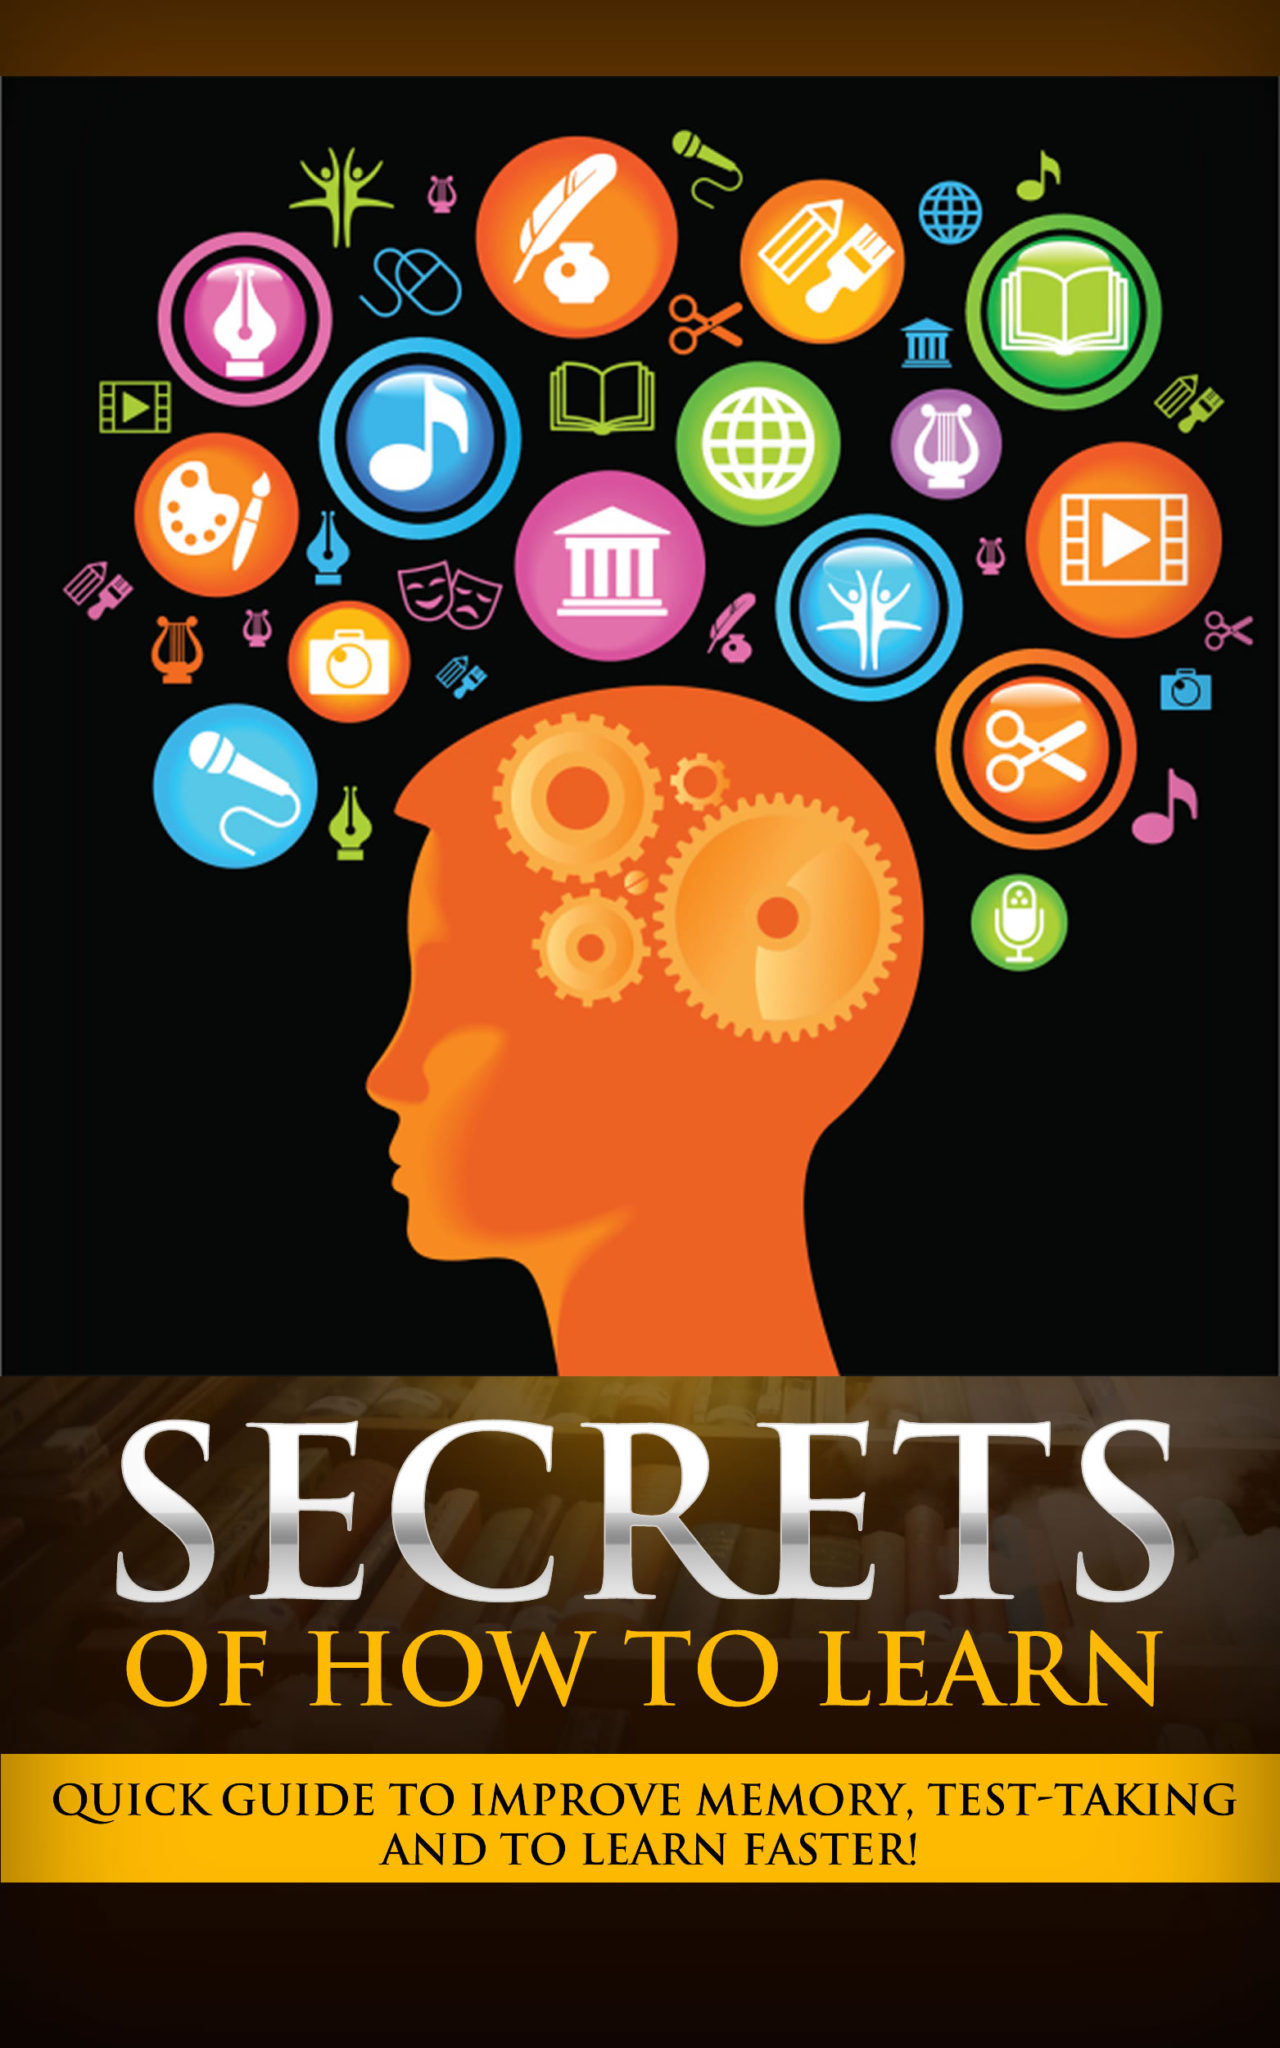 FREE: Secrets of How To Learn: Quick Guild to Improve Memory, Test-Taking & How to Learn Faster by Kris Kaynes